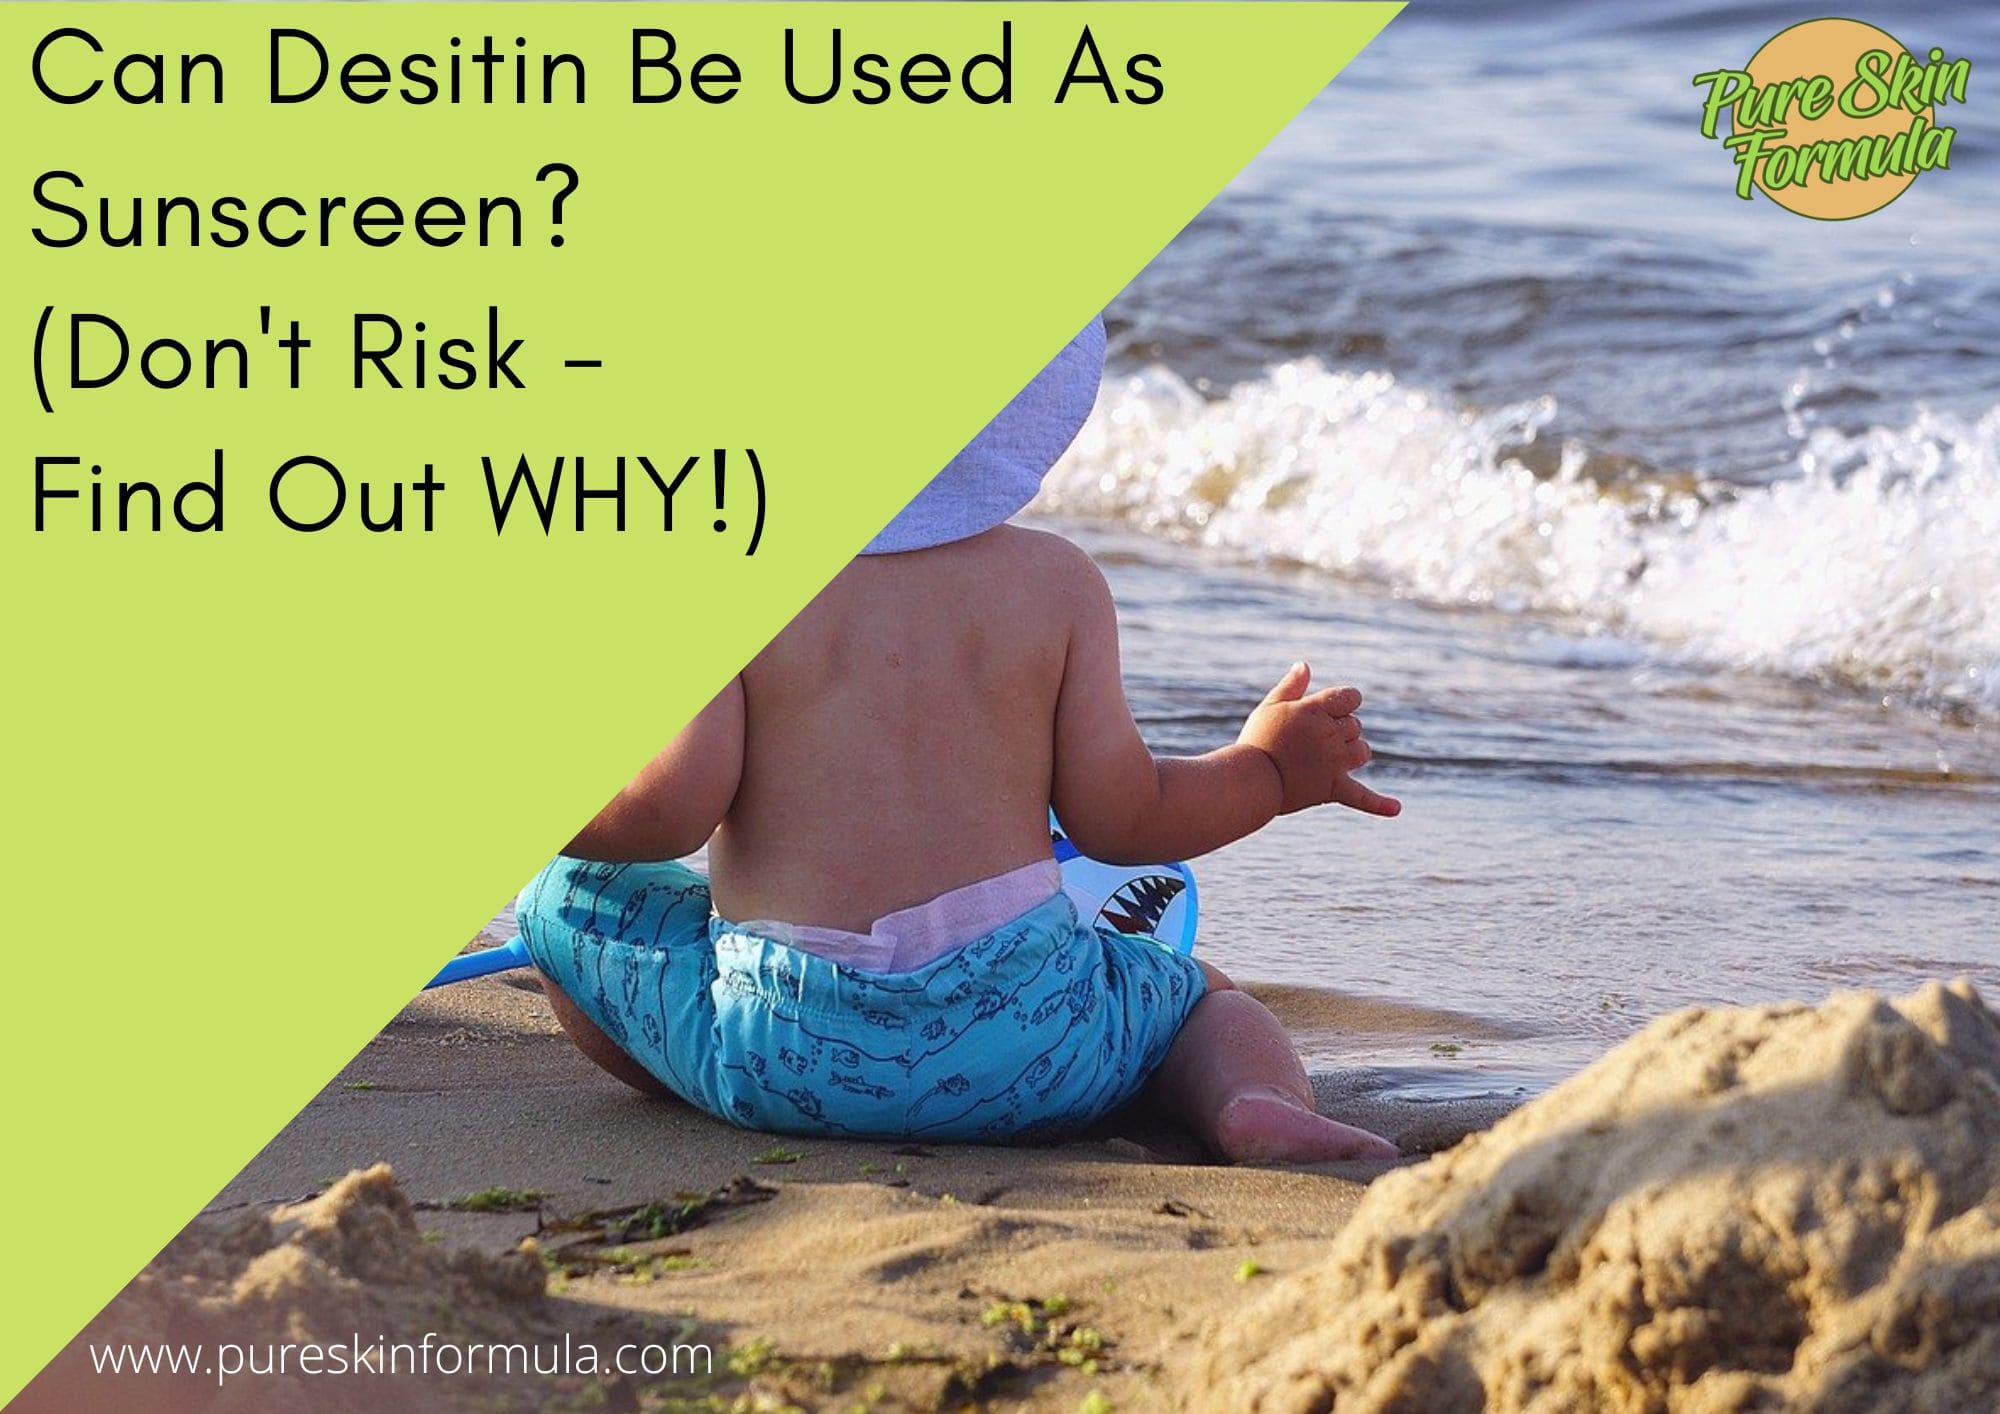 Can Desitin Be Used As Sunscreen_featured image